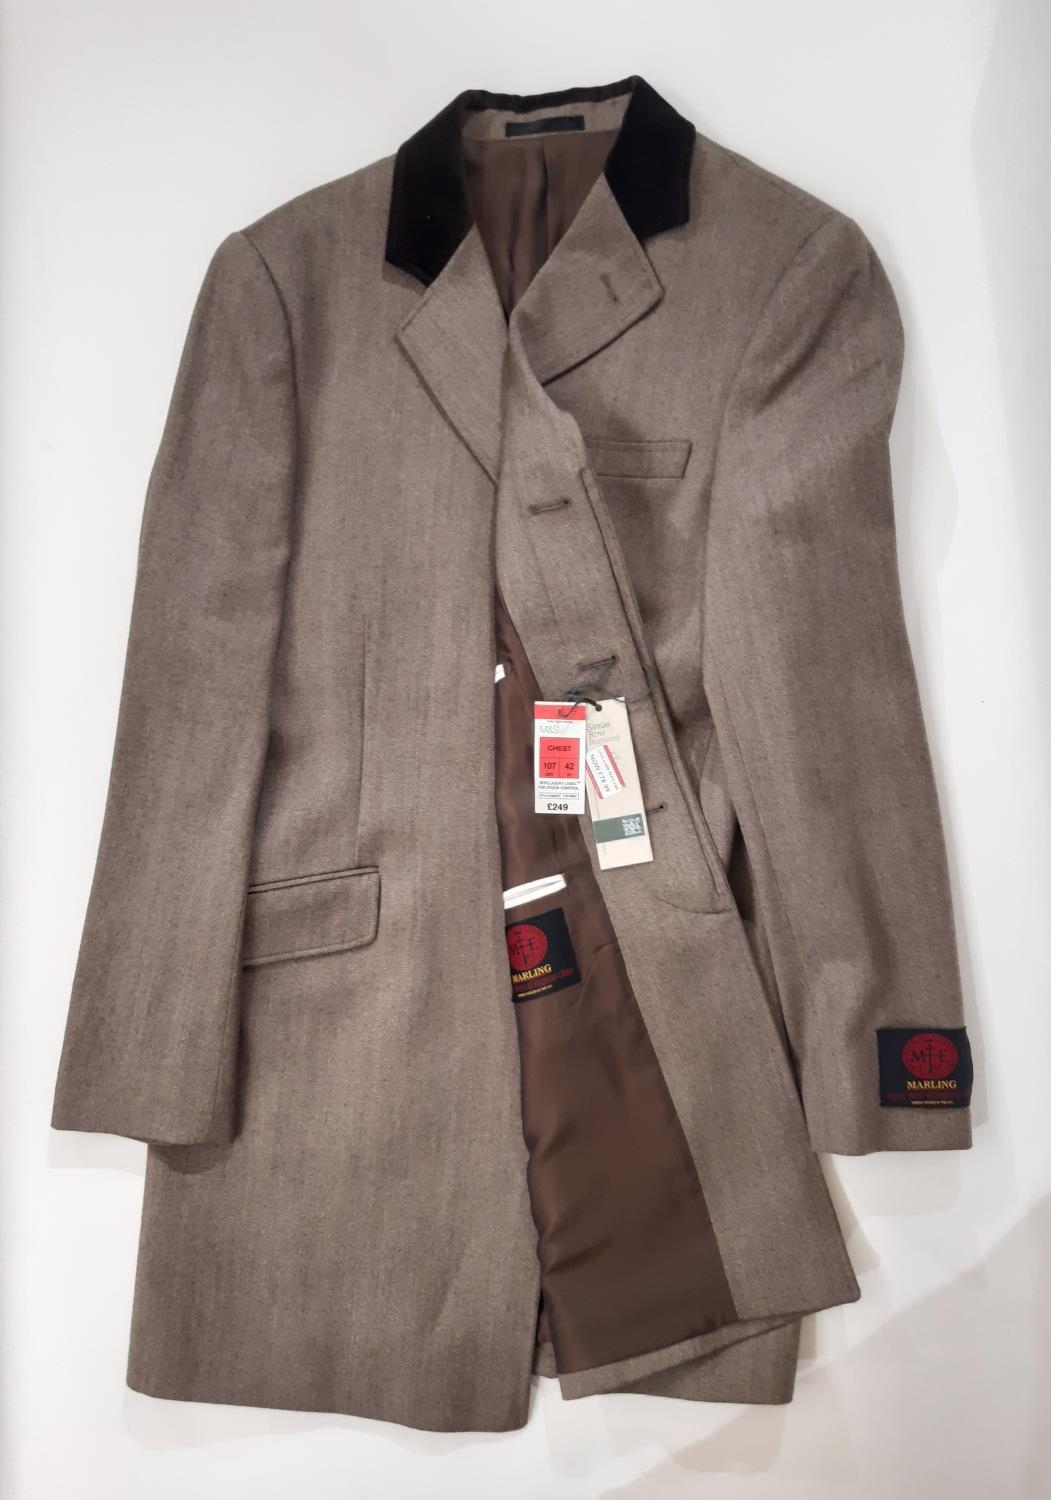 4 good quality men's coats like new with tags including coats by Jaeger XL, Christiano Baldinucci - Image 4 of 4